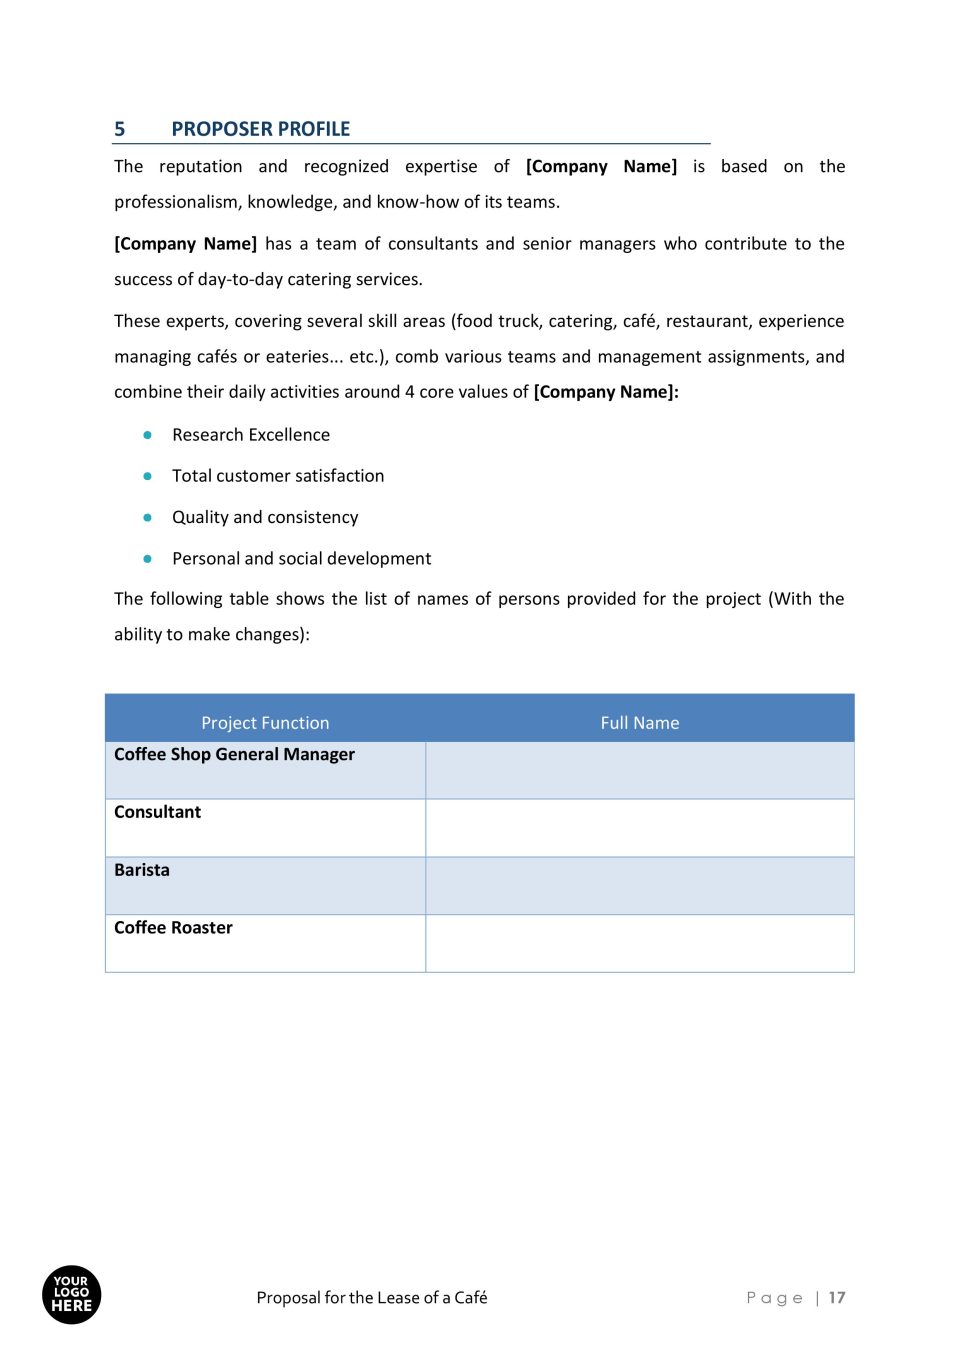 Business Proposal CAFE LEASE Request For Proposals For the Lease of a Cafe Template 17 scaled